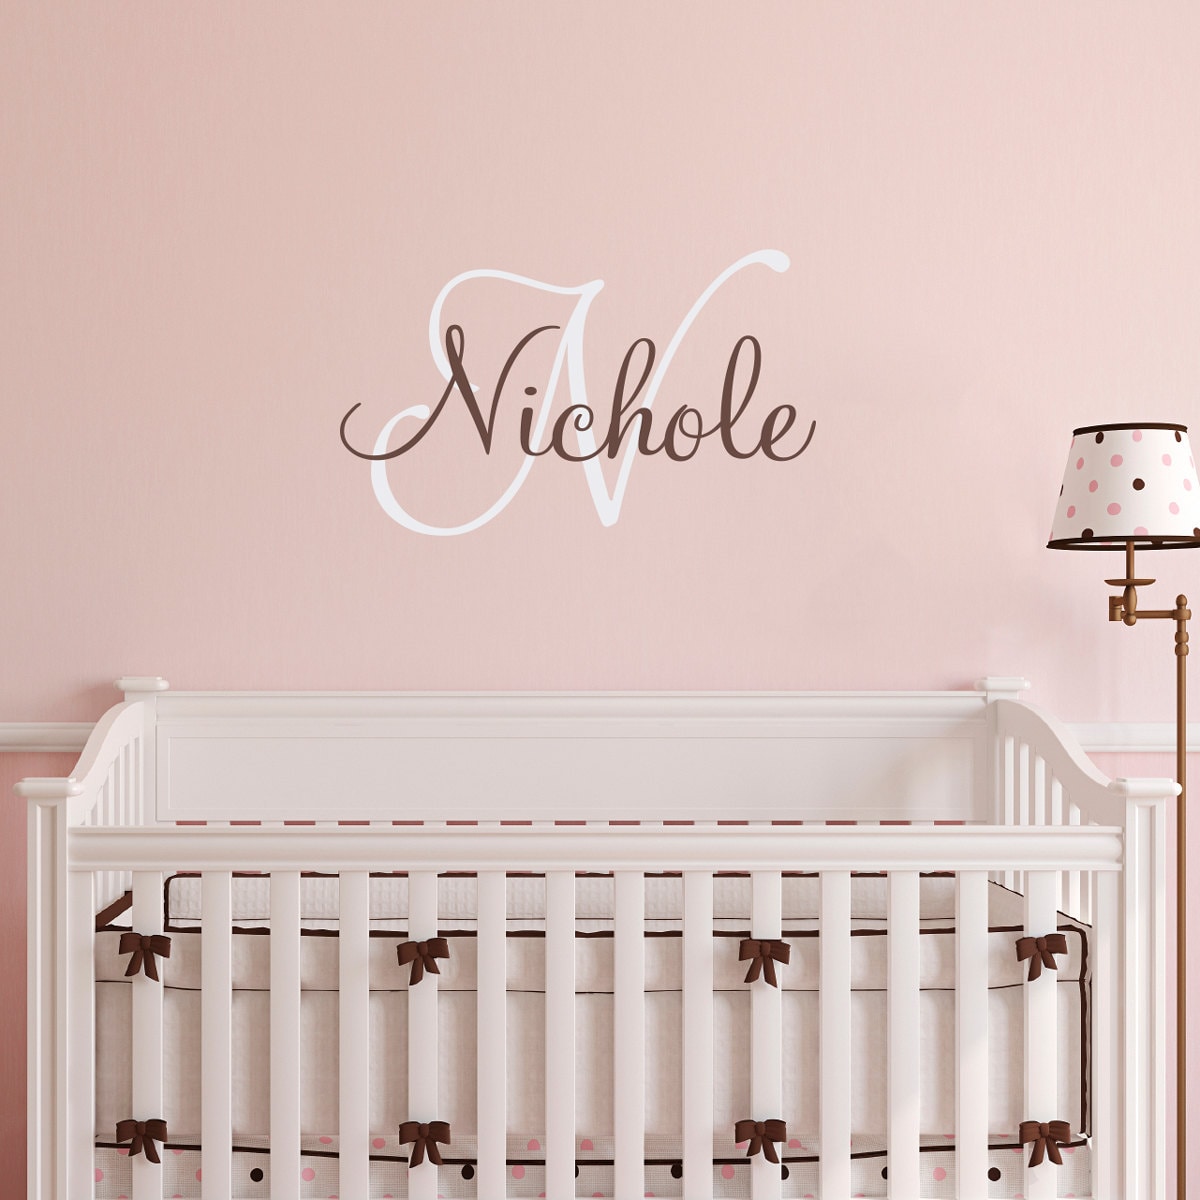 Initial & Name Wall Decal - Girls Name Decal - Initial Wall Sticker - Medium (5)